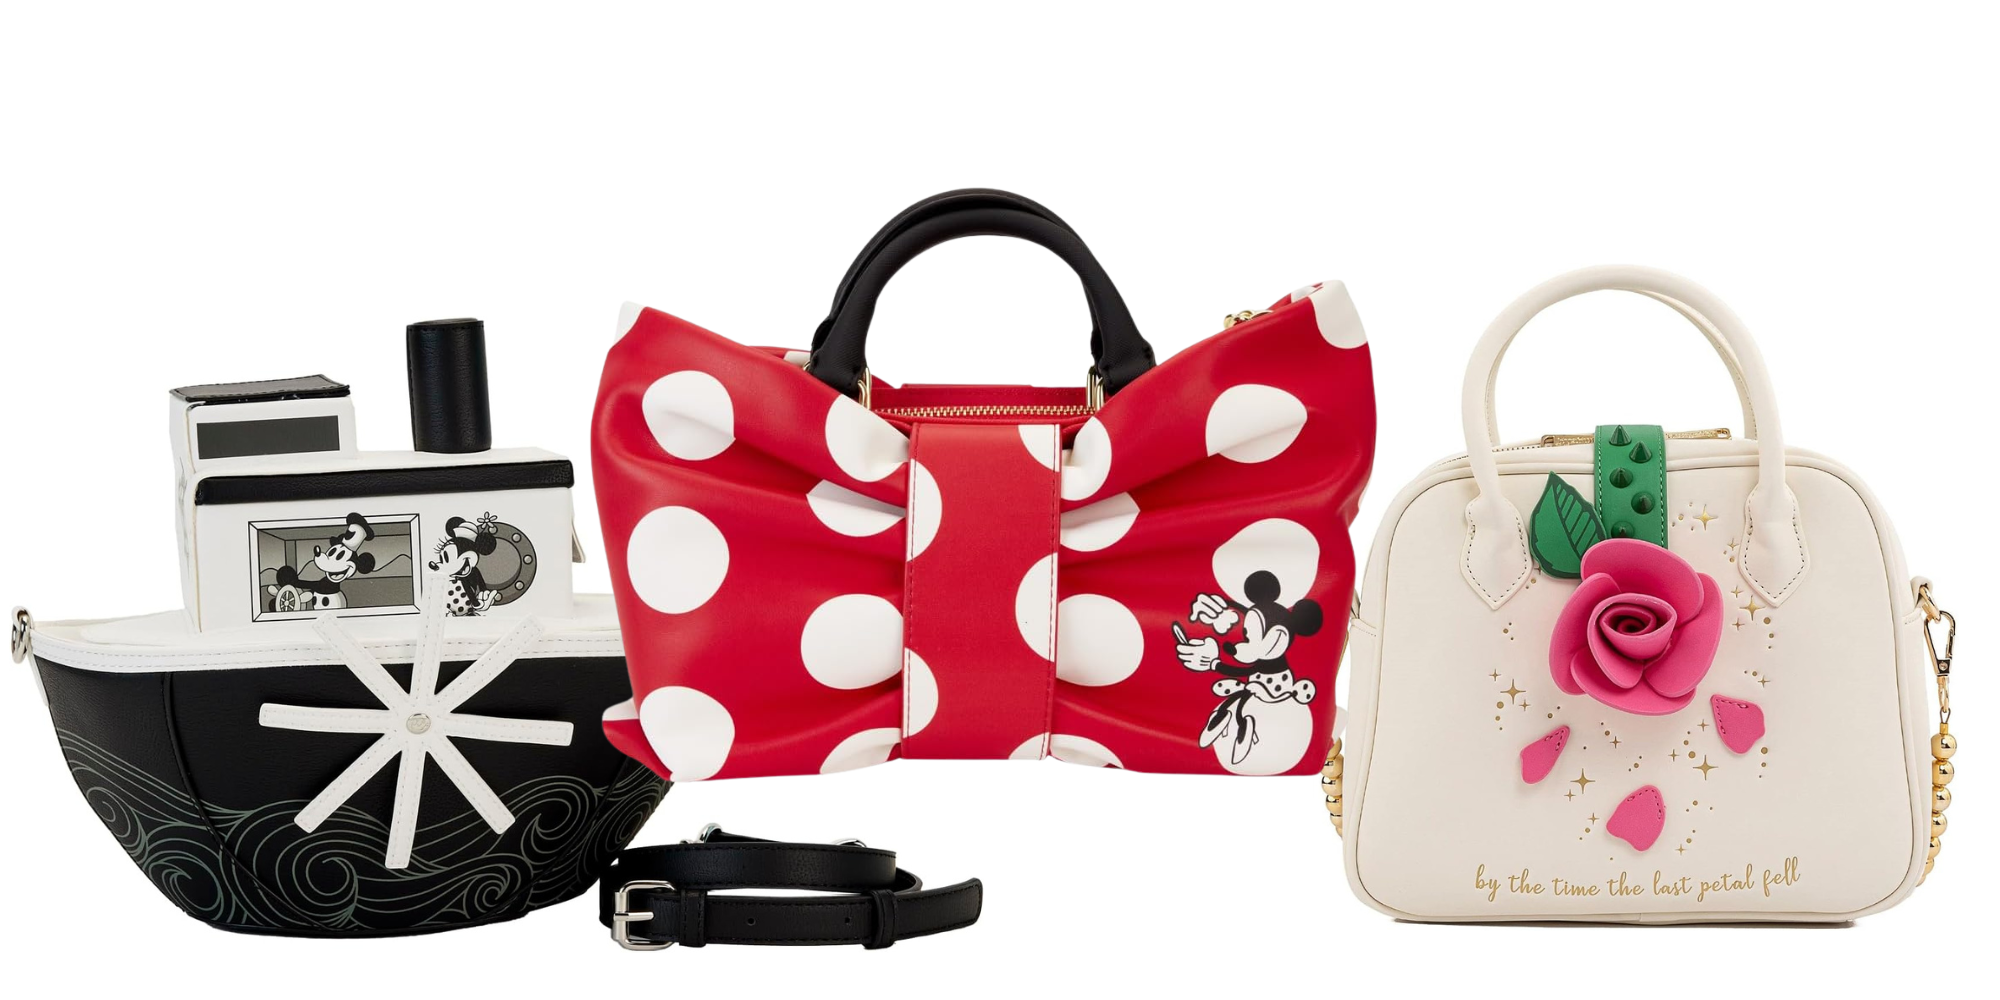 Loungefly Minnie Mouse Pink Polka Dot Embossed Bag Review - YouTube